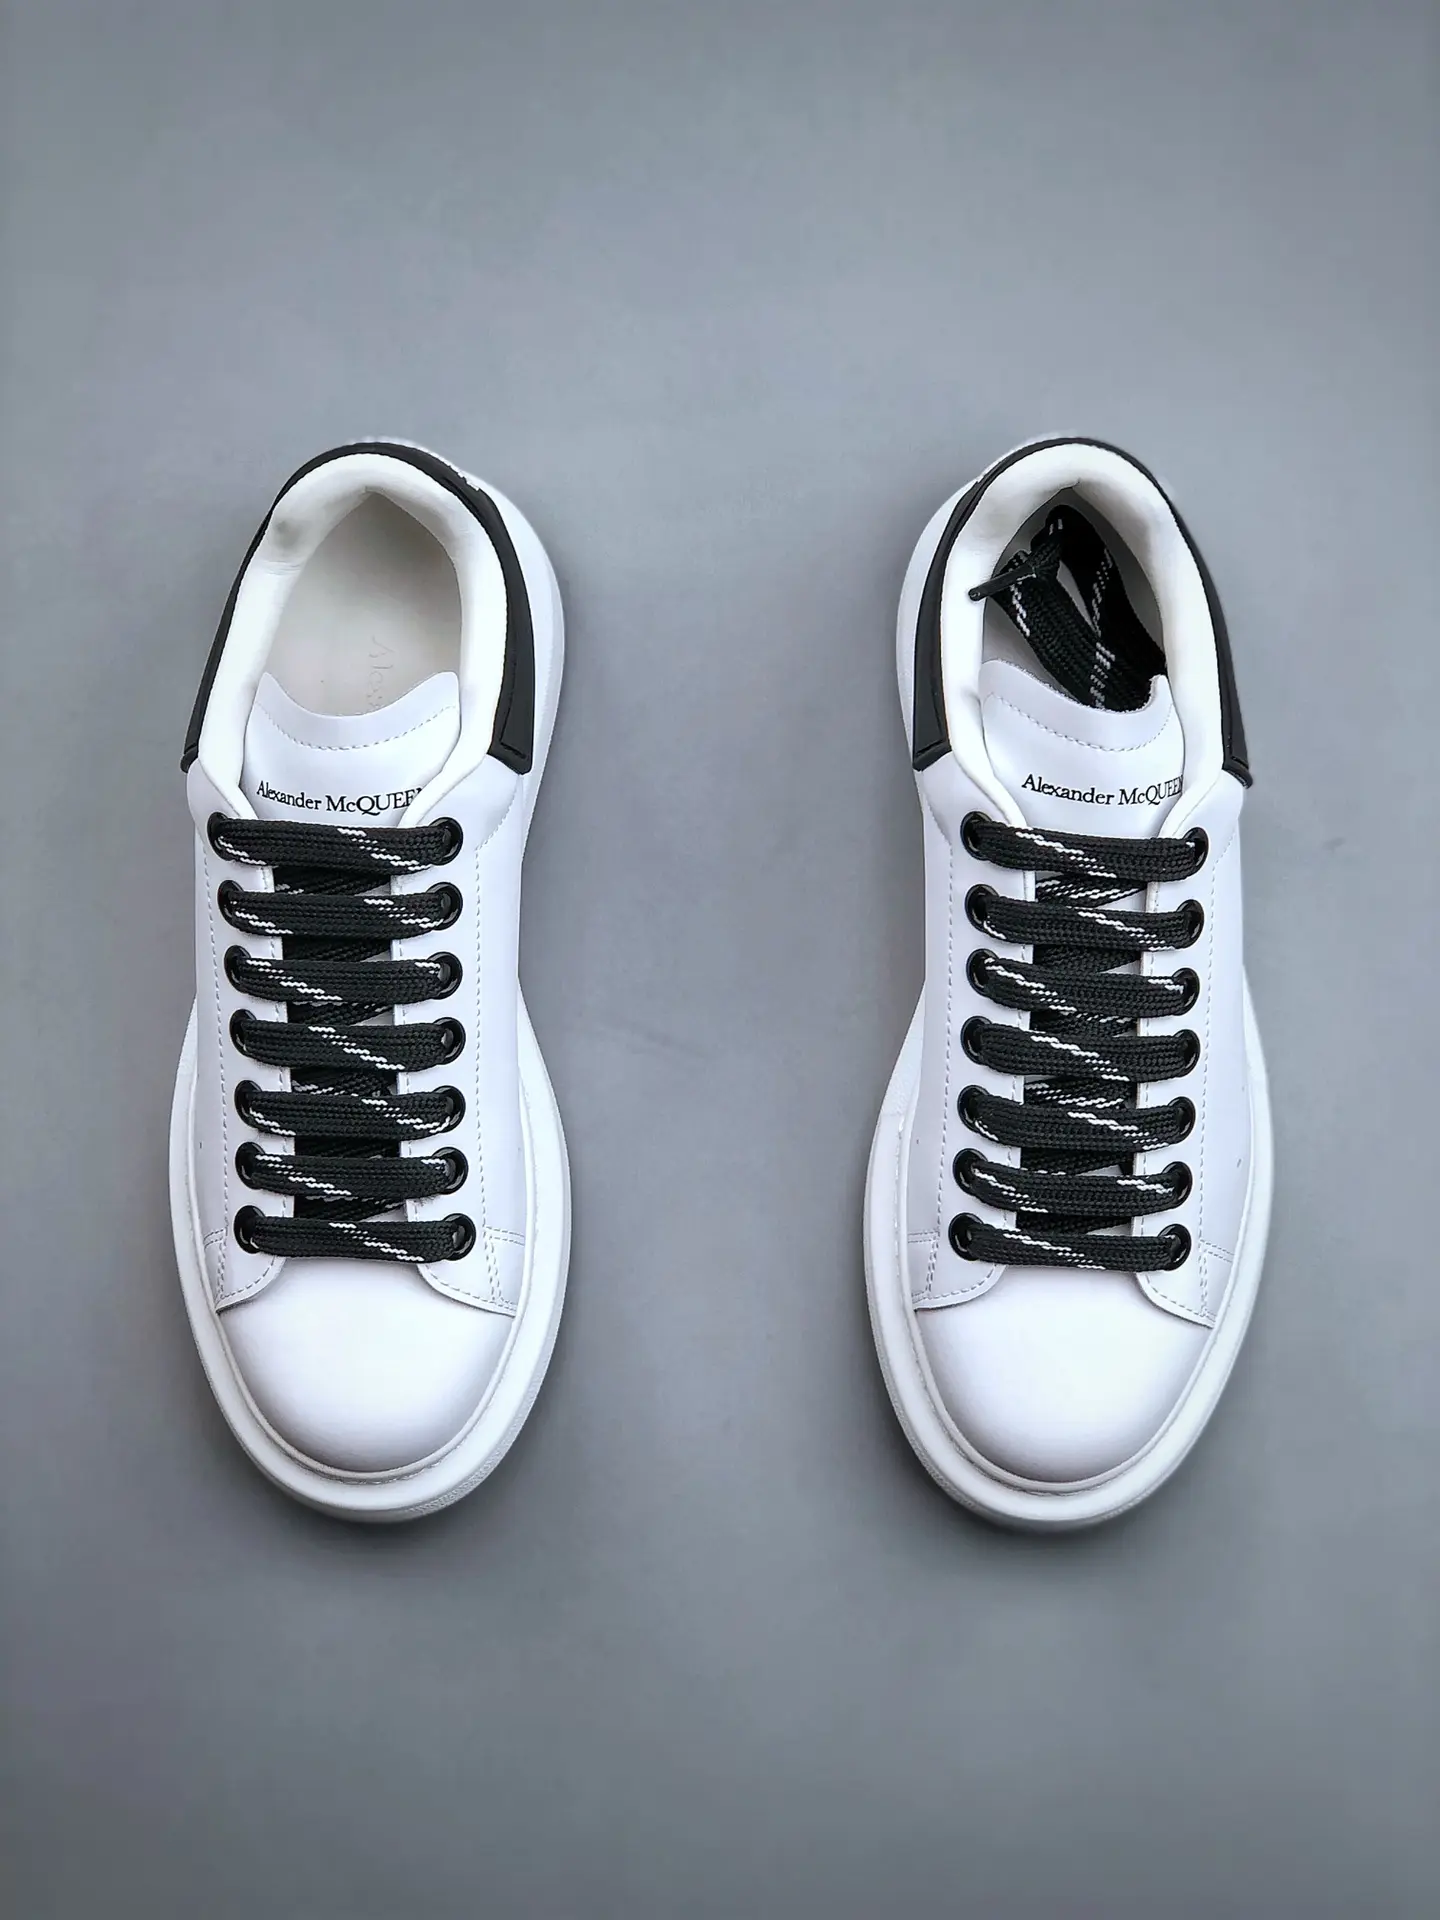 Alexander McQueen White Leather Casual Sneakers Review | YtaYta